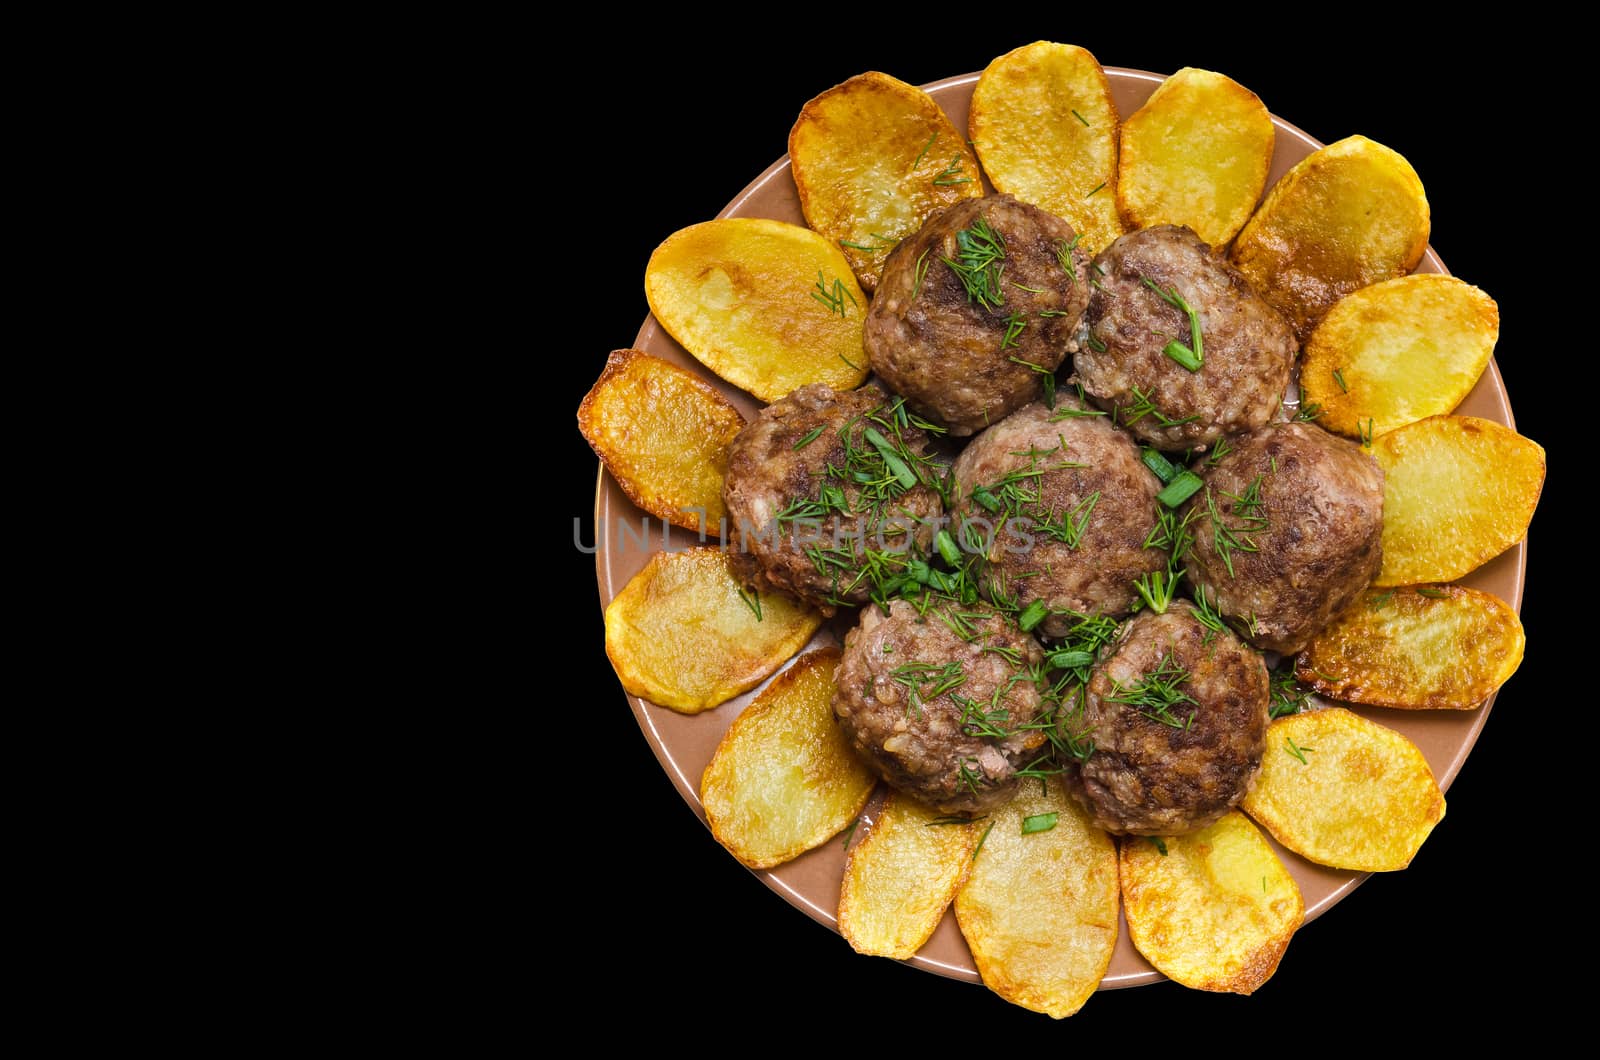 Fried meatballs with rice and French fries, on a black background by Gaina